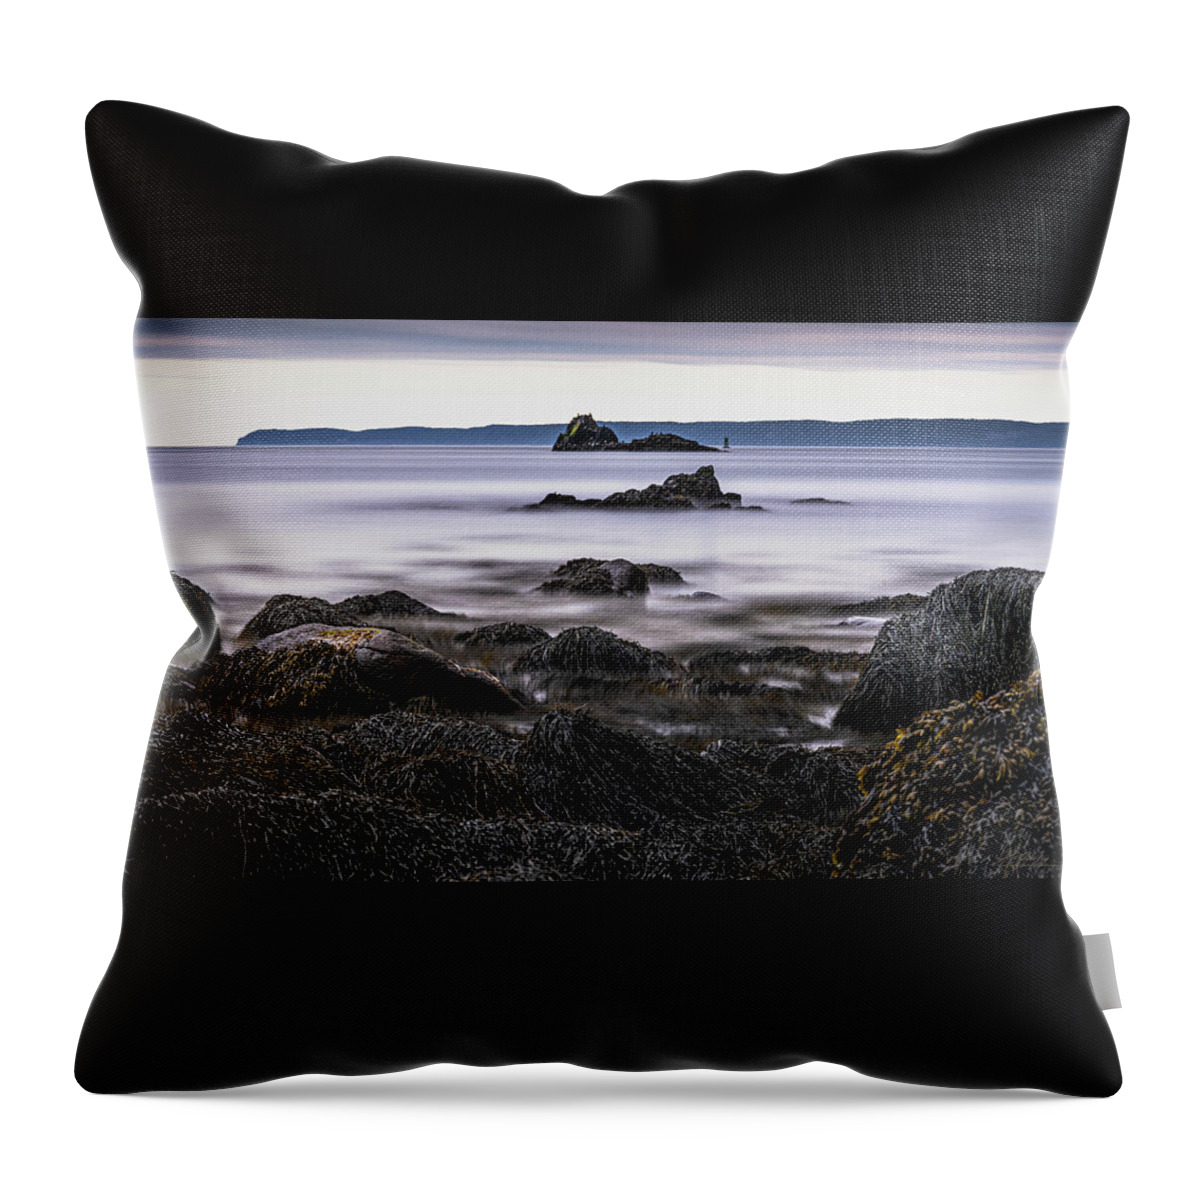 Rockweed Laden Throw Pillow featuring the photograph Coastal Outcrops At Quoddy by Marty Saccone